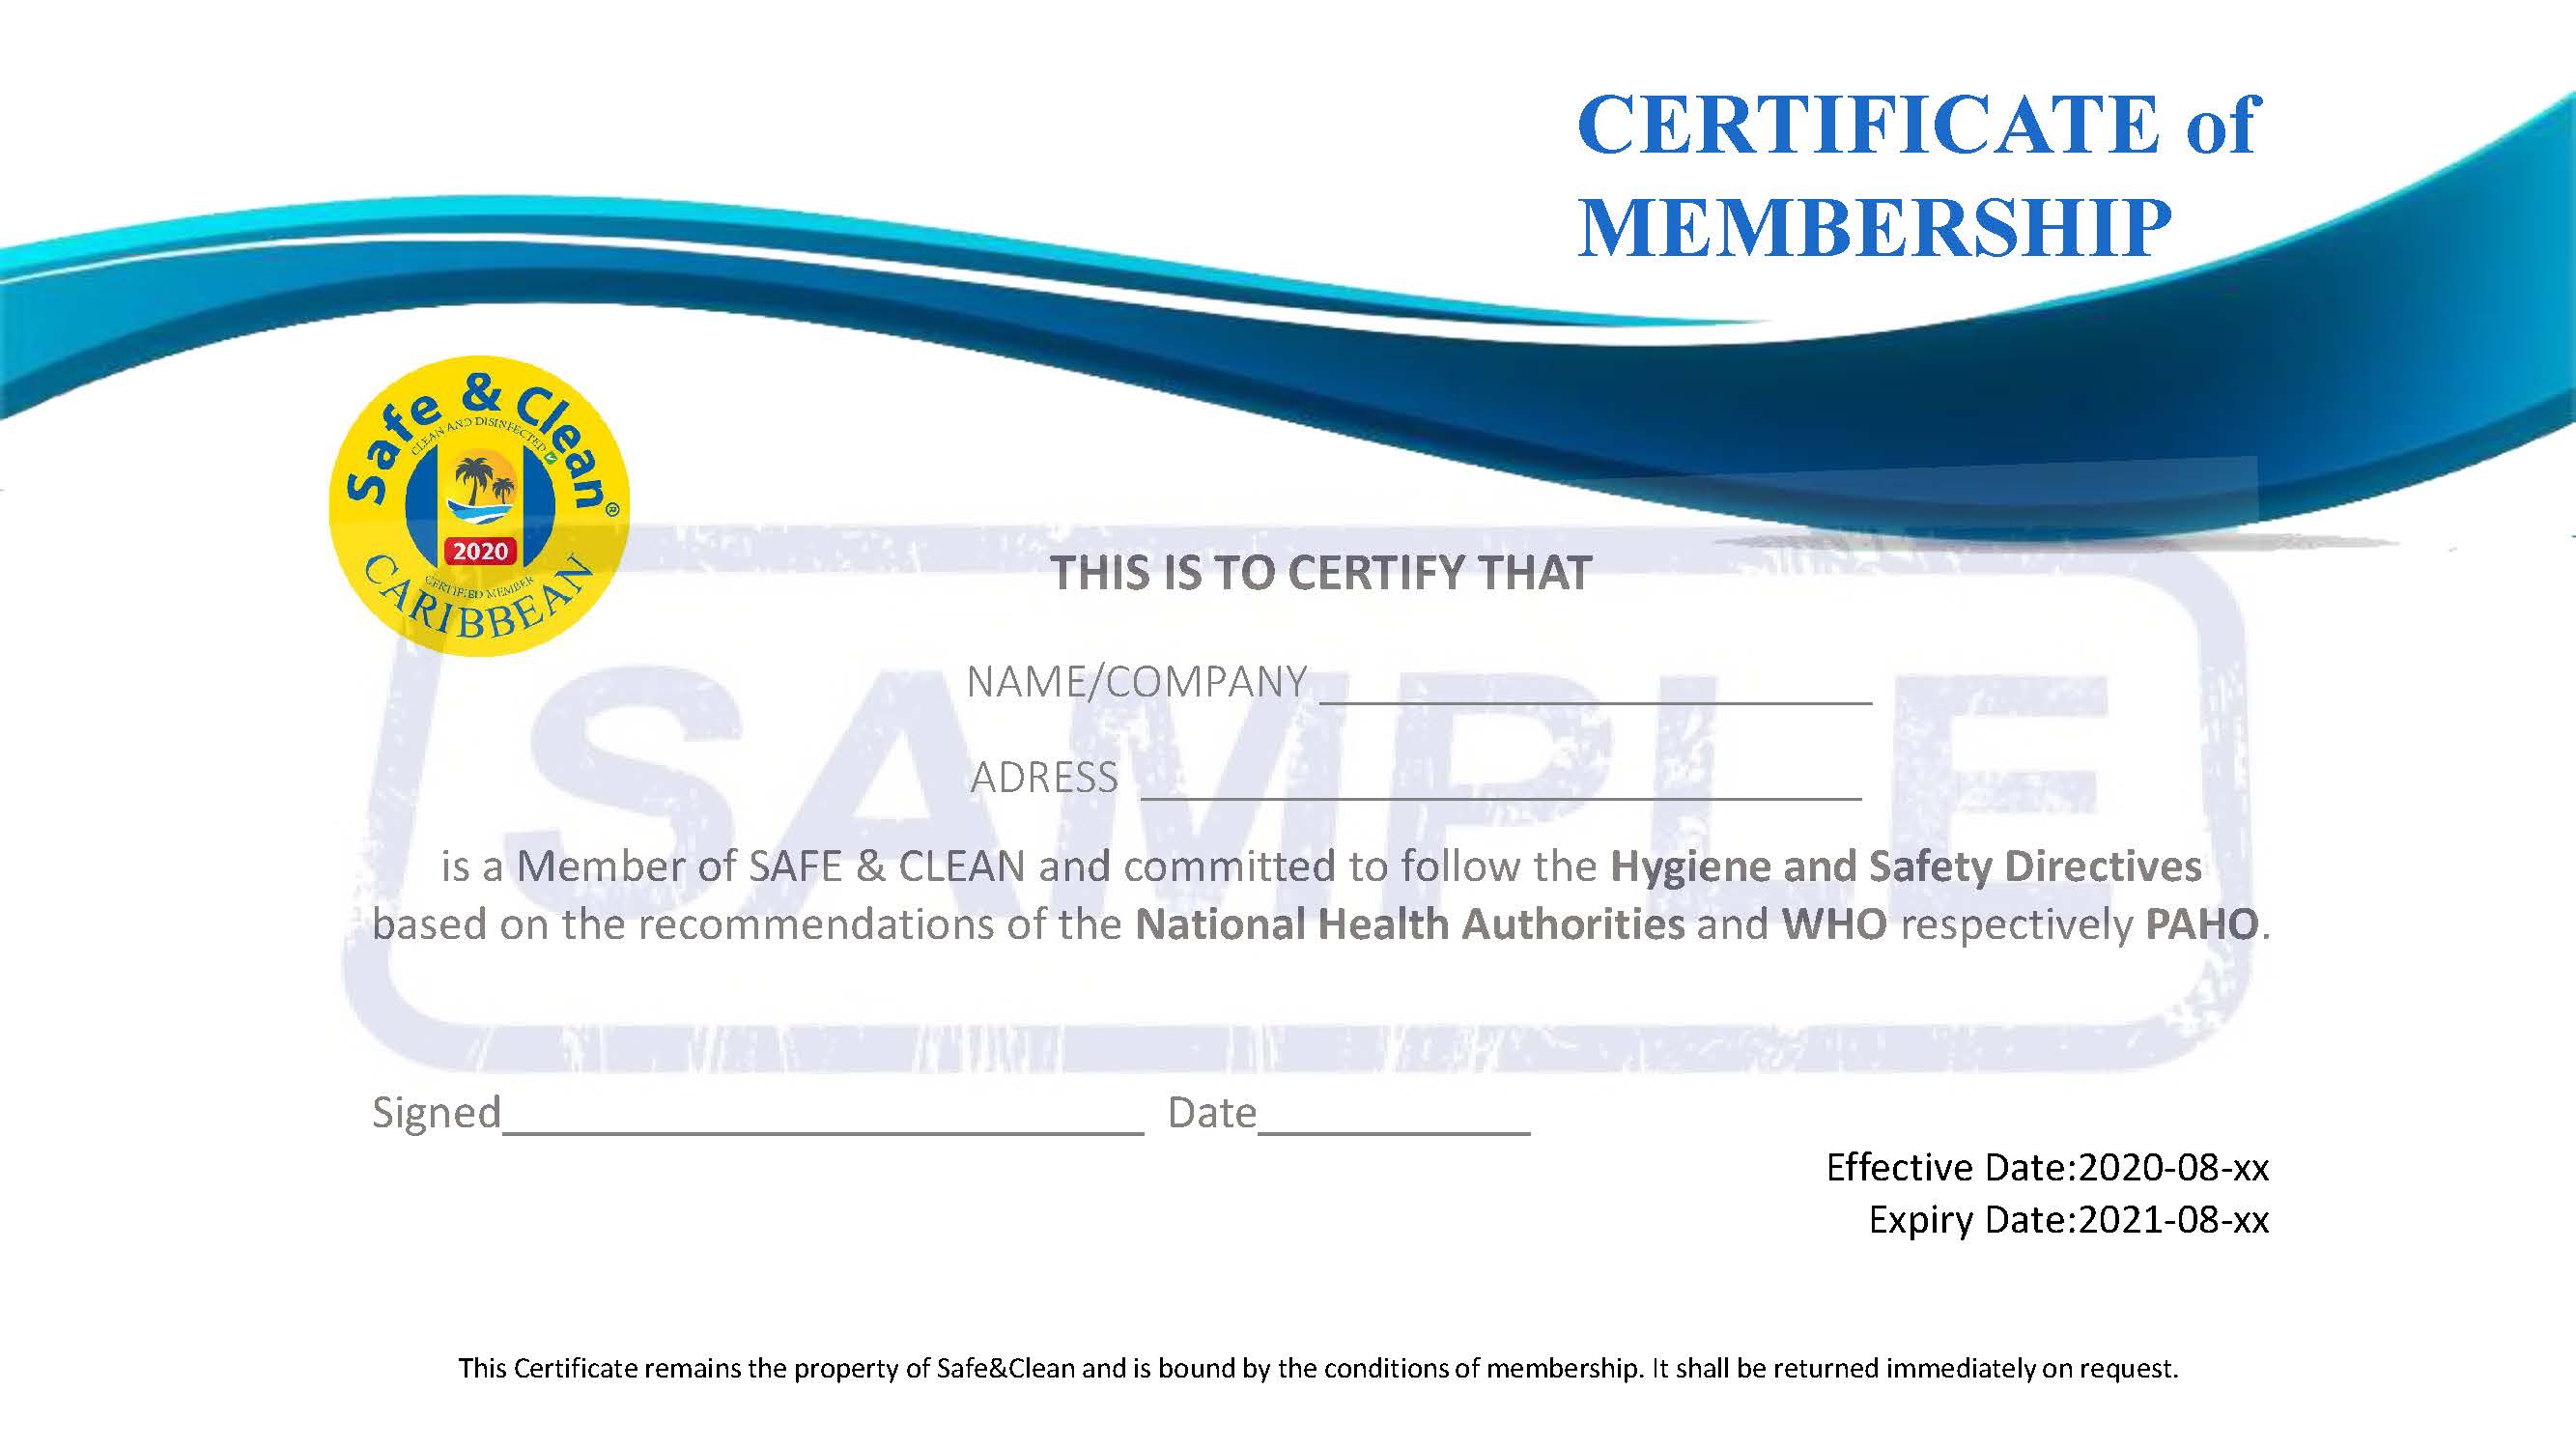 The Certificate - Safe and Clean Certification